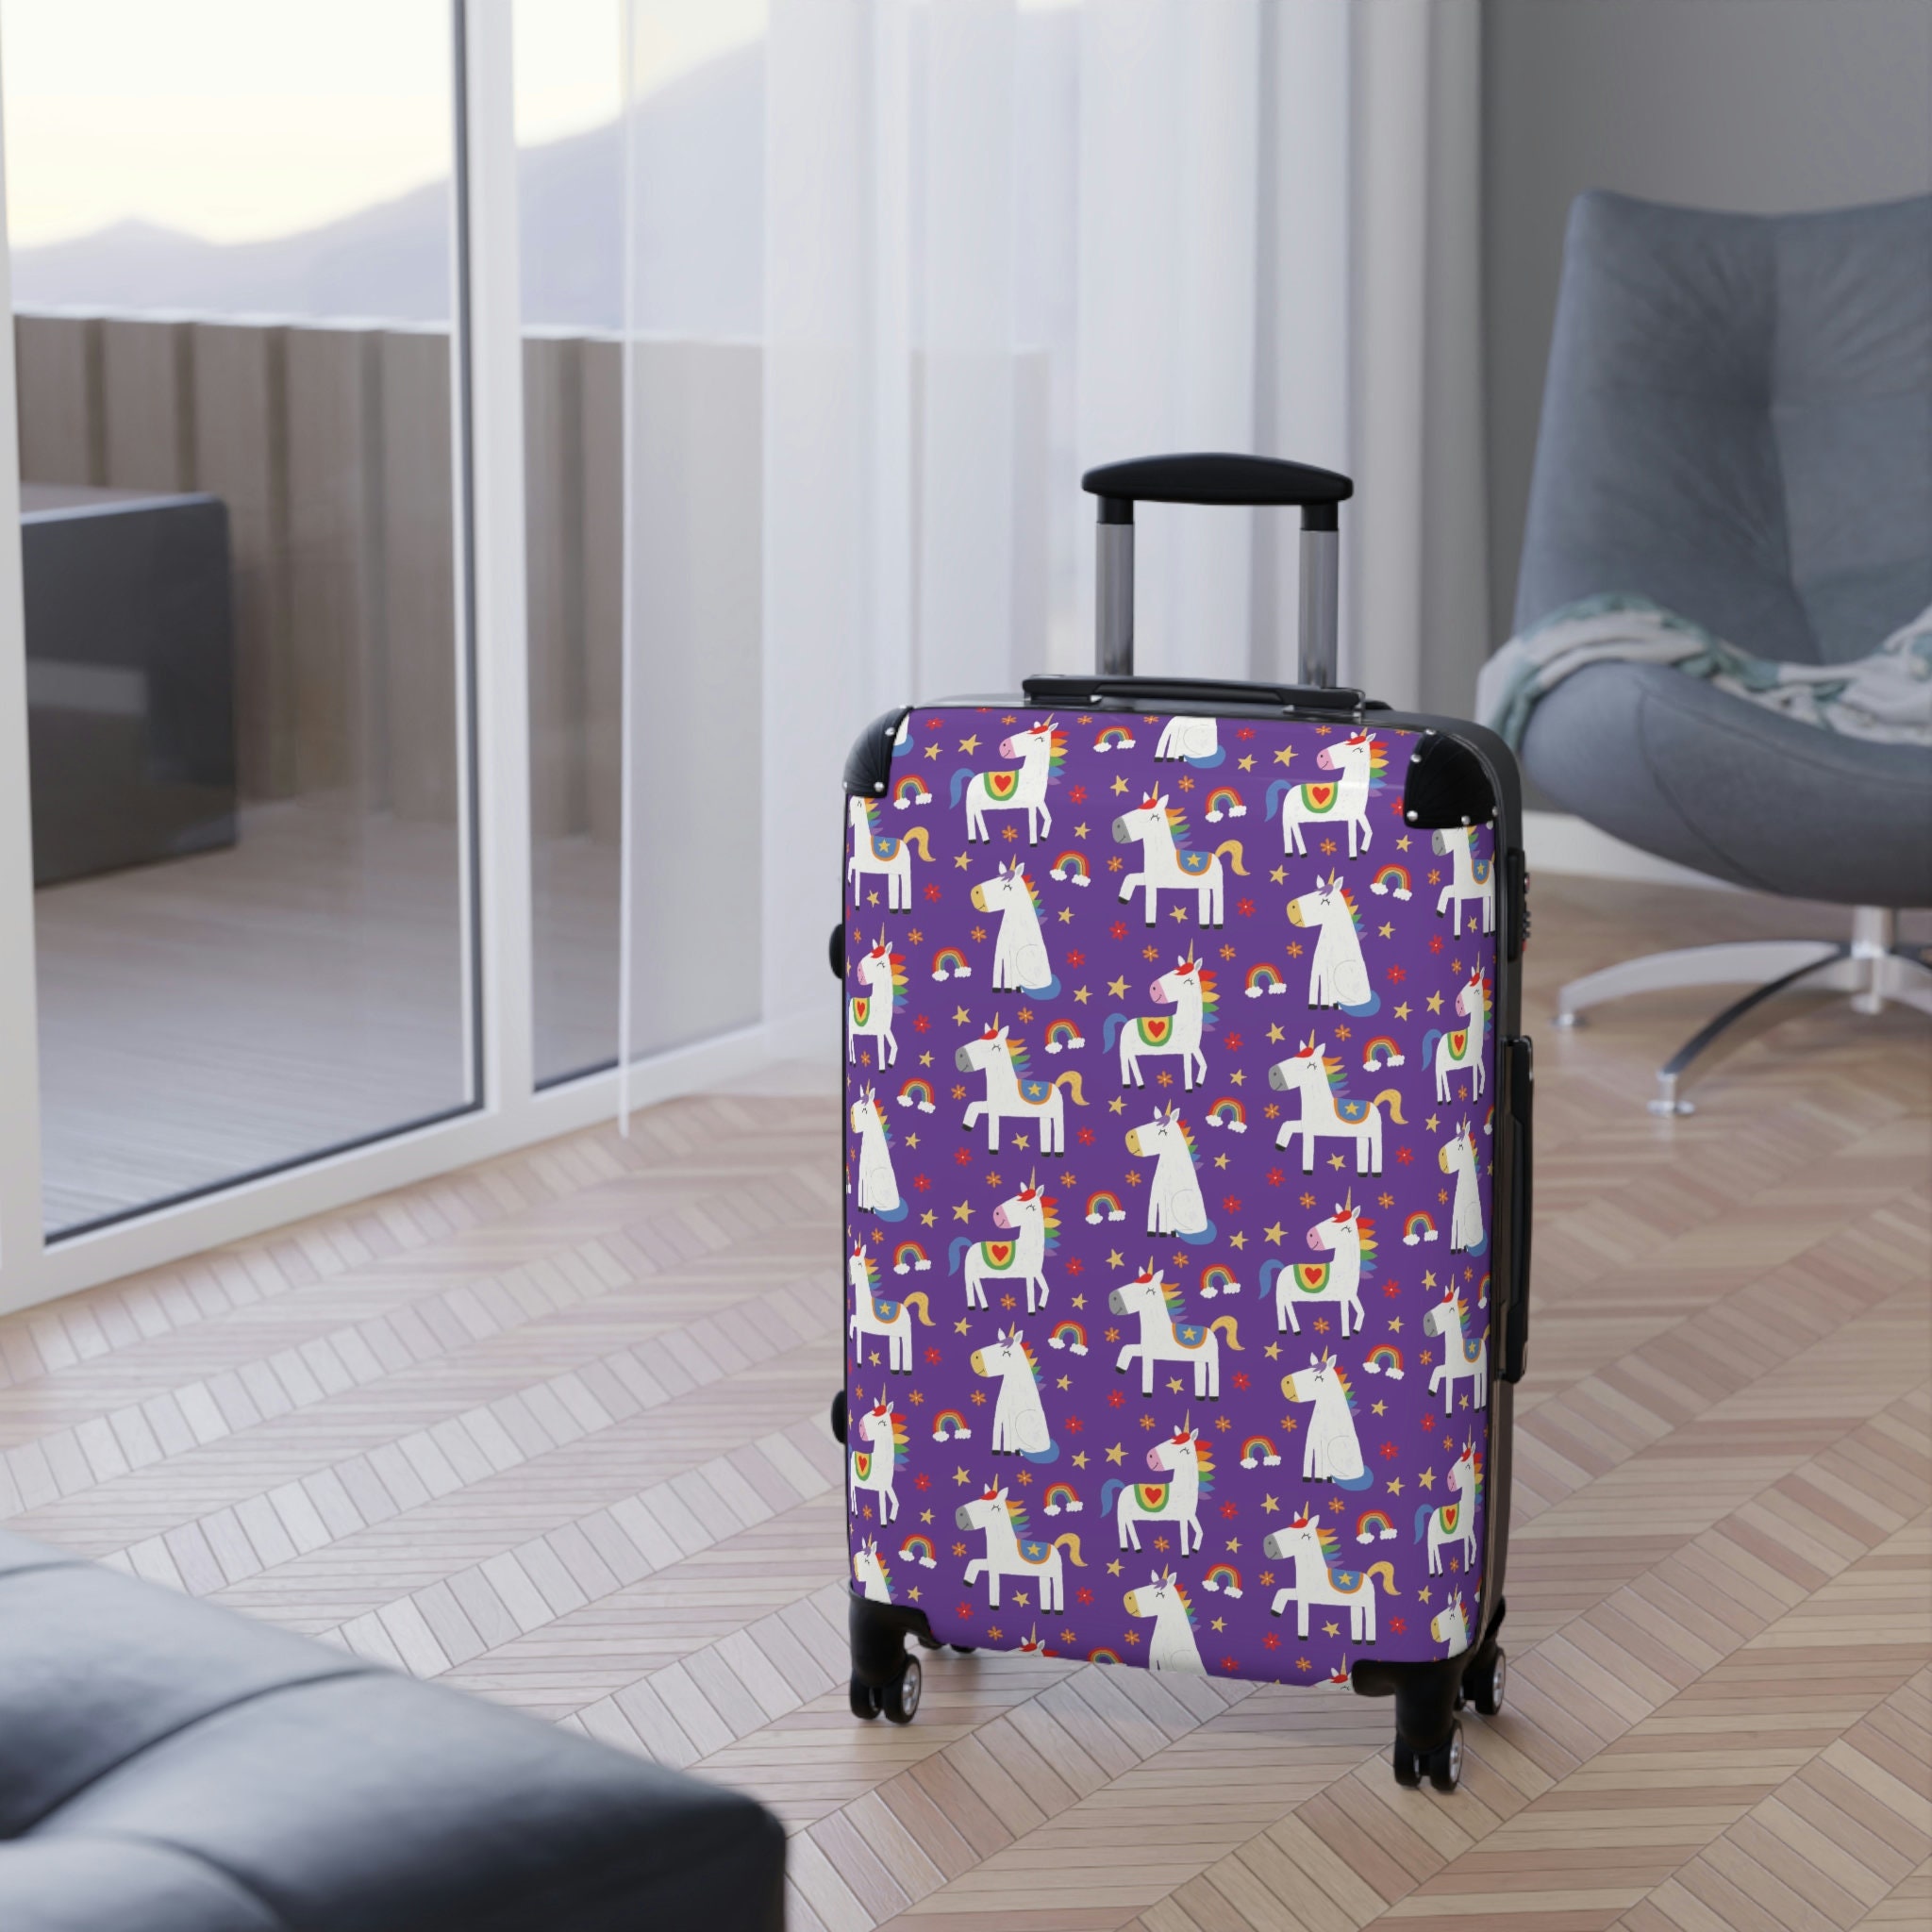 Discover Unicorn Kids Suitcase Rainbow Carry On Roller Bag Fun Unicorn Child Luggage Cover